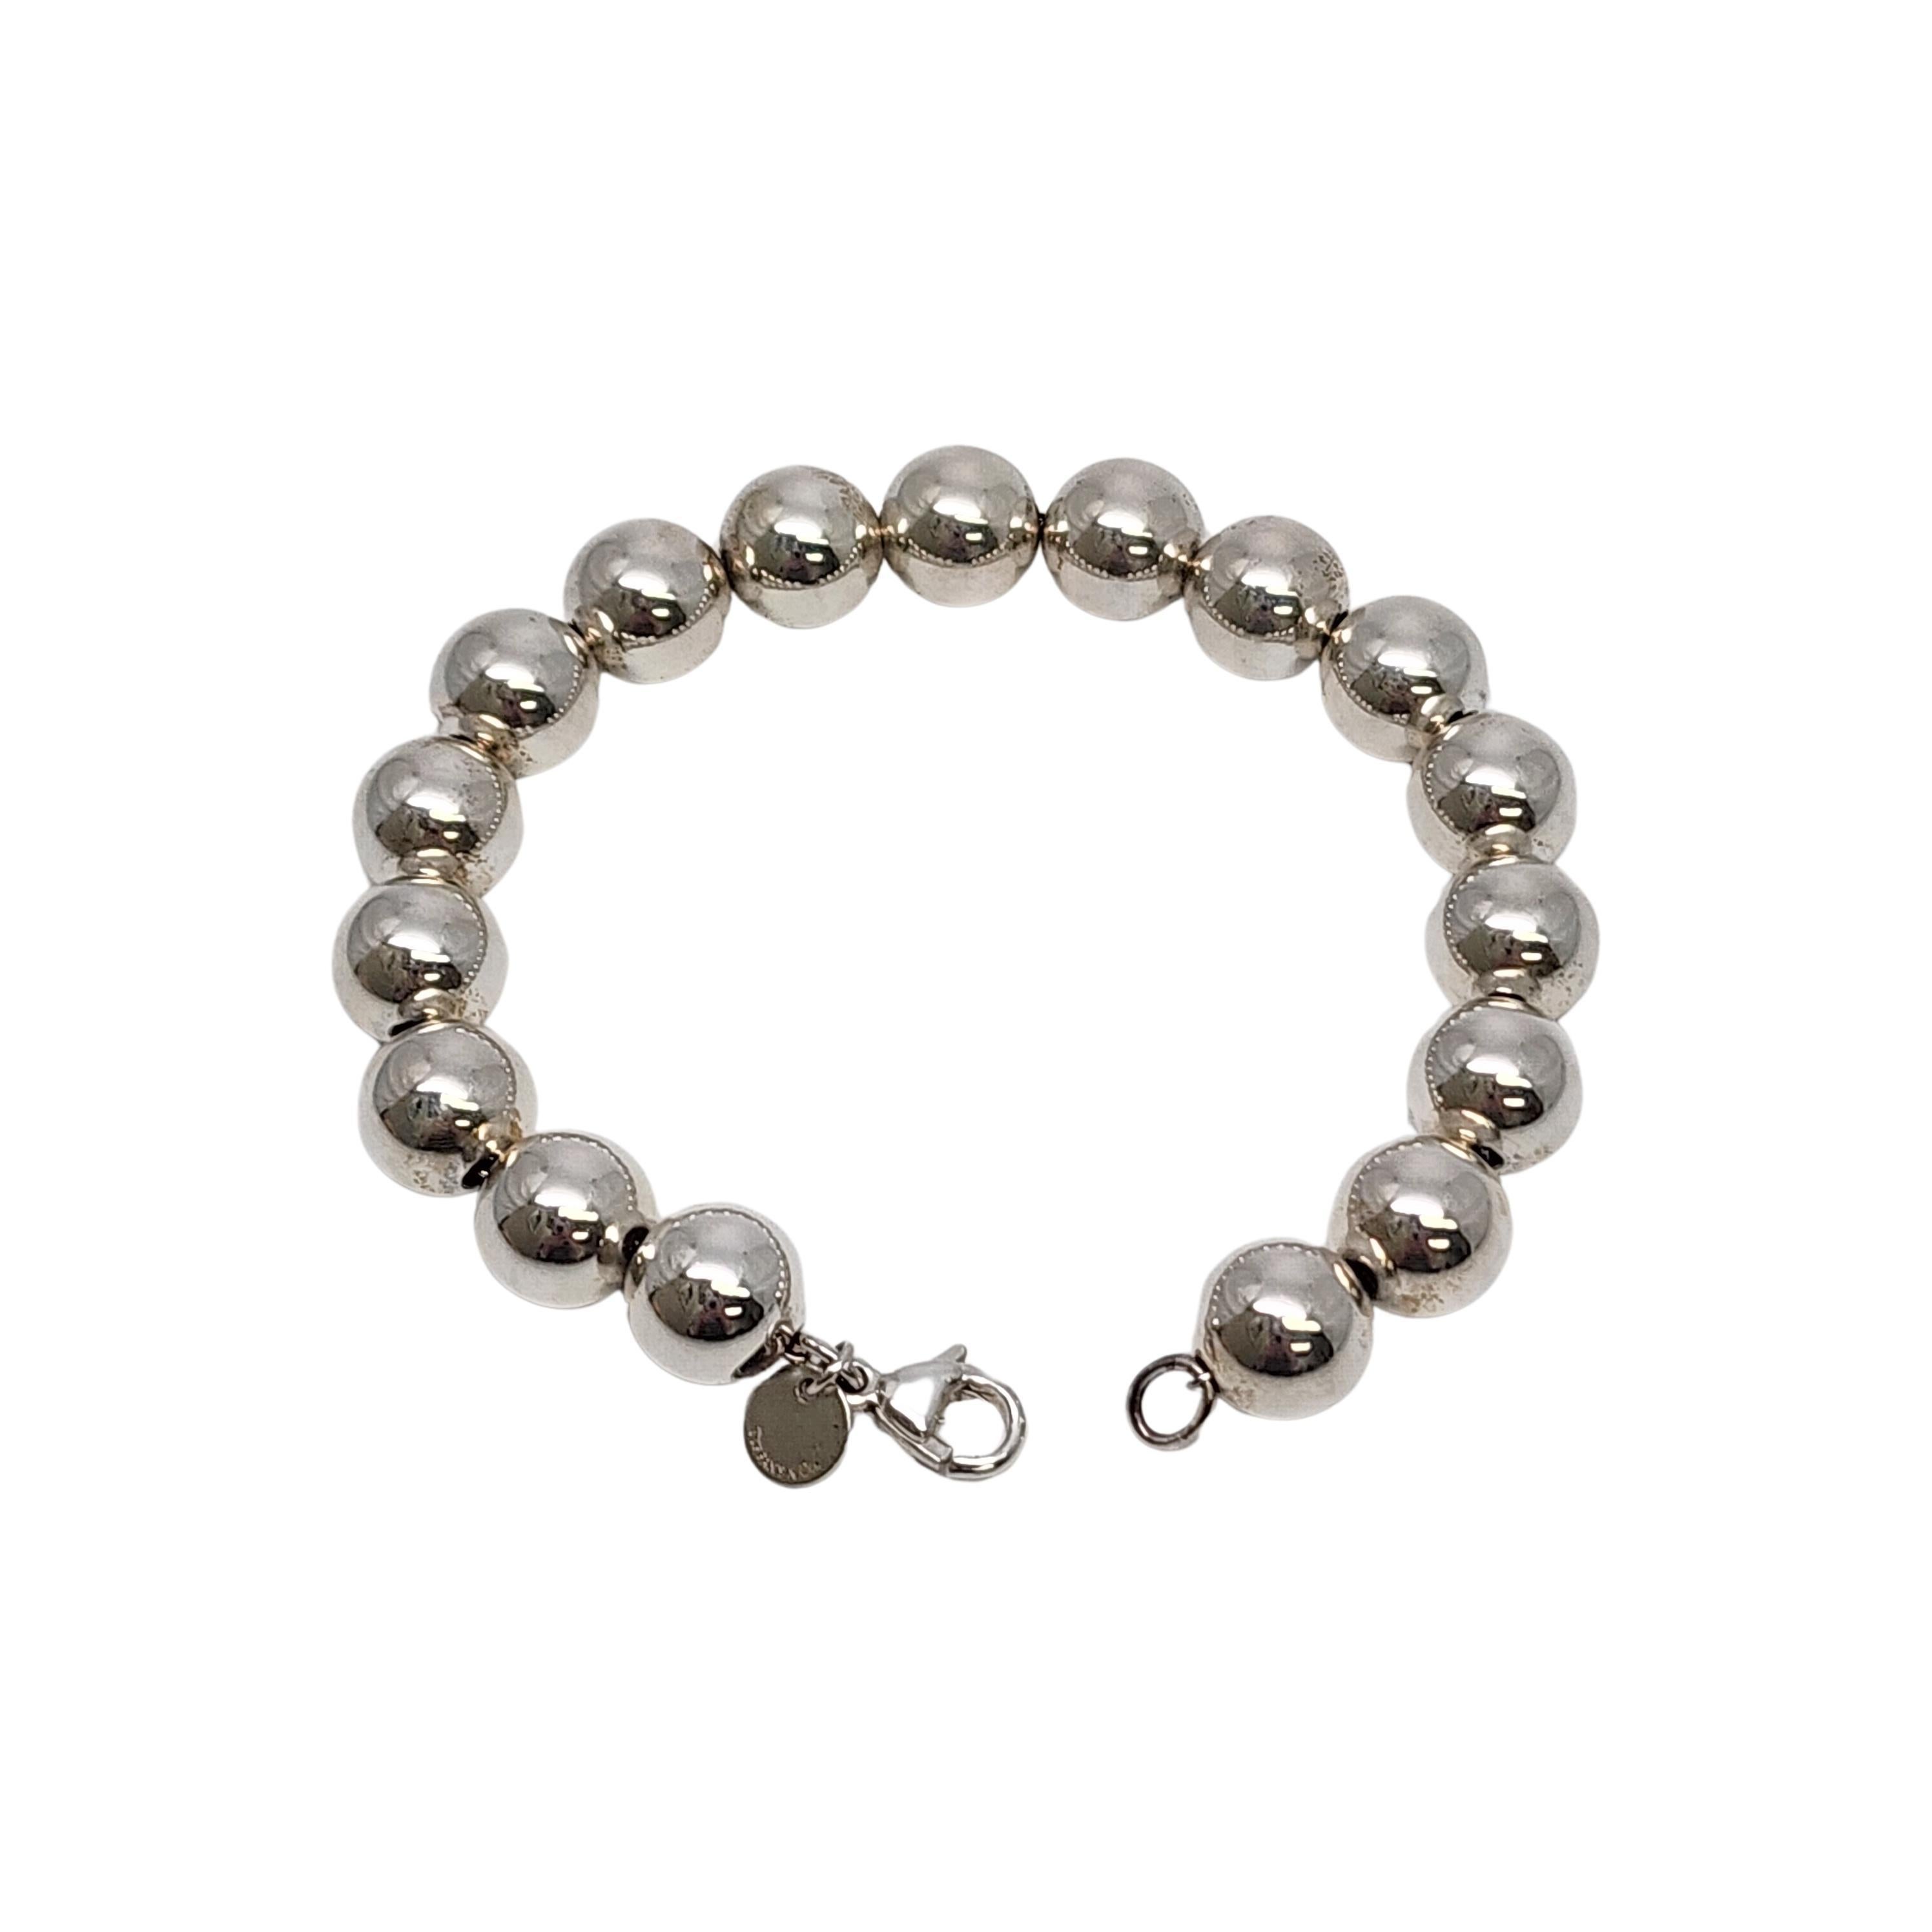 Sterling silver 10mm ball bead bracelet by Tiffany & Co.

Authentic Tiffany bracelet featuring 10mm sterling silver ball beads. Tiffany pouch and box are not included.

Measures approx 6 1/4